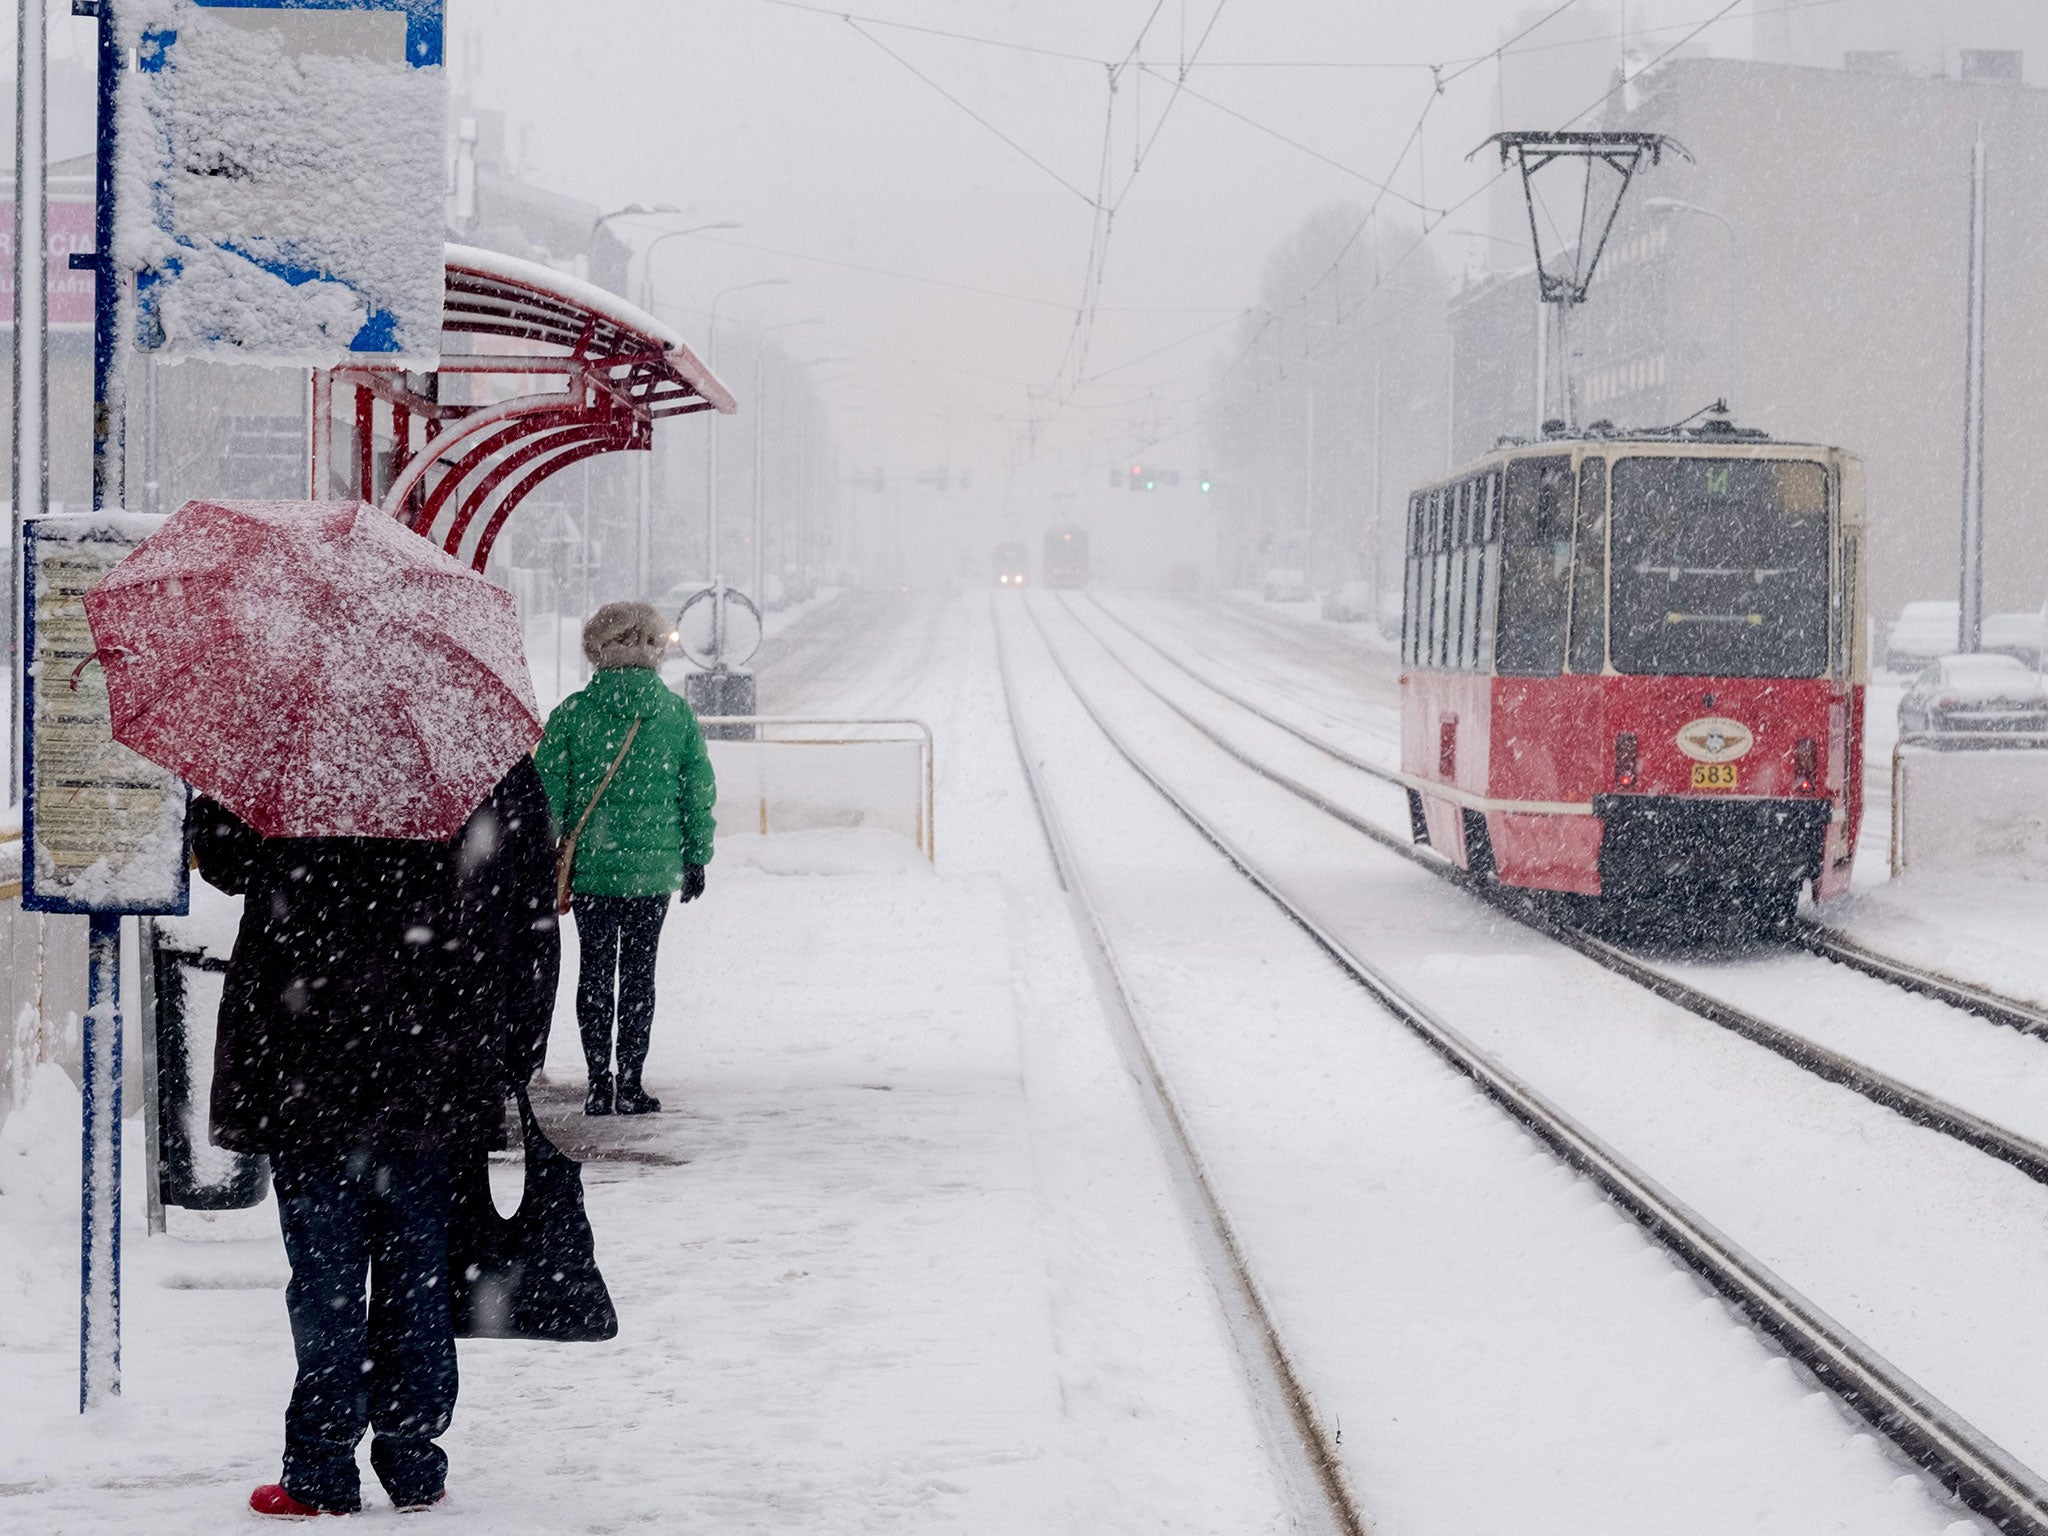 Pedestrians making their way during a heavy snowfall in Katowice, Silesia, southern Poland, 04 January 2017.